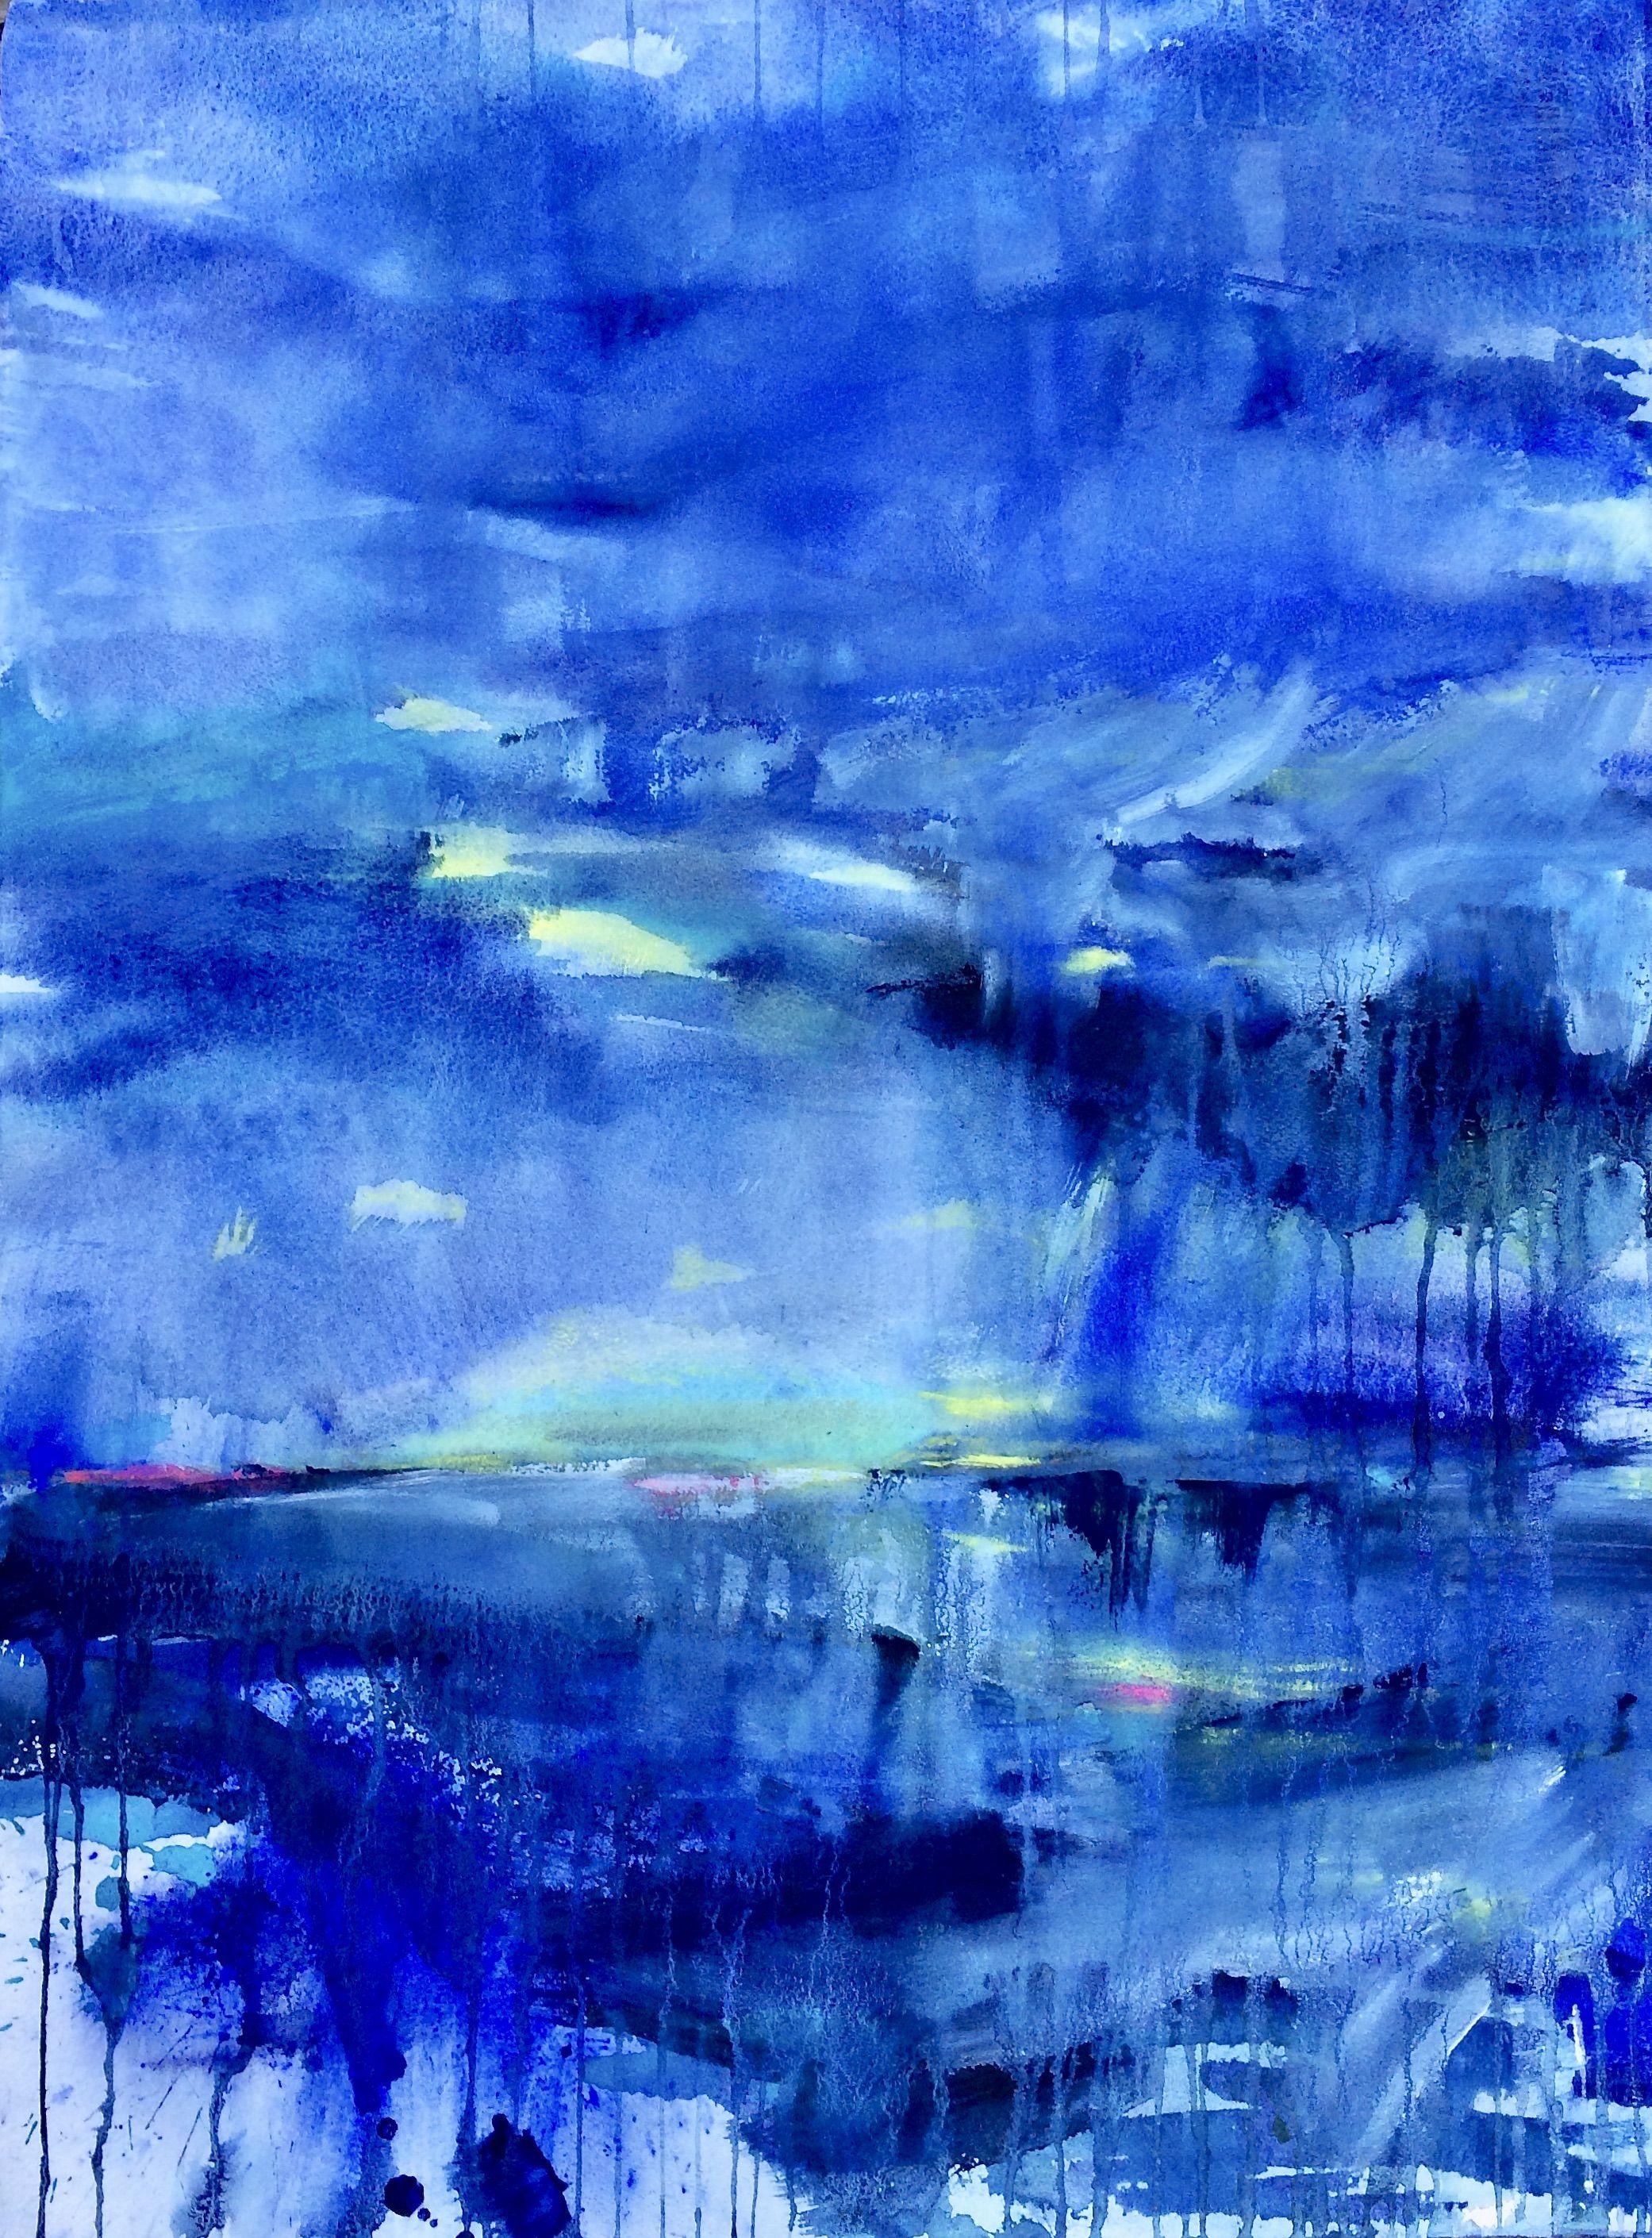 Blue Permission, Painting, Watercolor on Paper - Art by Gesa Reuter